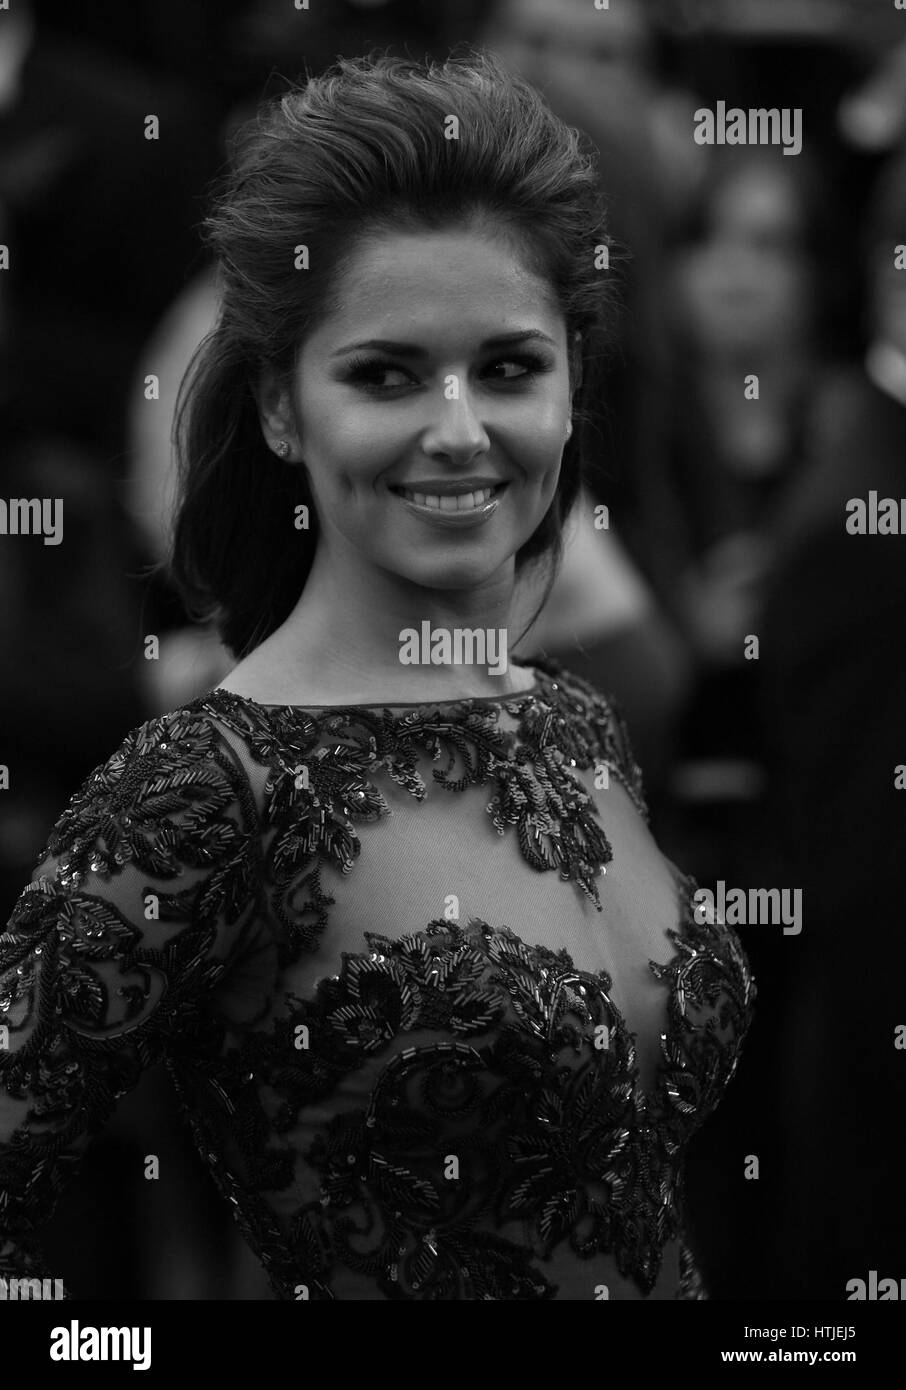 Cannes, France, 18th 05,2013: Cheryl Cole attends the Jimmy P. Psychotherapy Of A Plains Indian premiere during The 66th Annual Cannes Film Festival at the Palais des Festivals in Cannes, France. Stock Photo